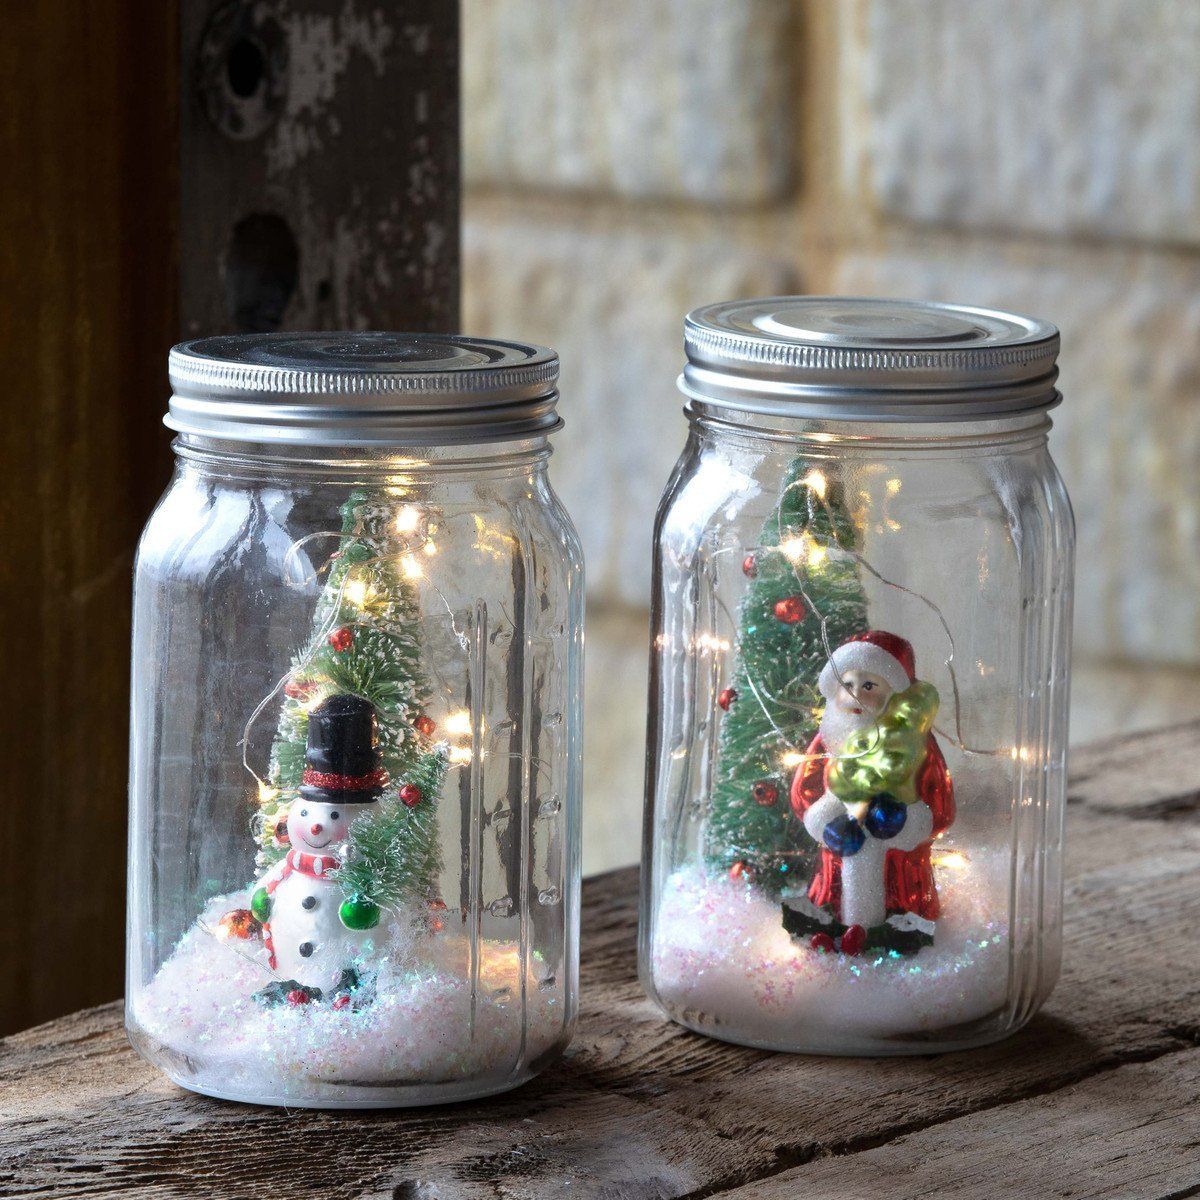 Snowman and Santa Lighted Filled Canning Jar - Set of 2 Assorted Styles -   19 xmas crafts decorations christmas lights ideas